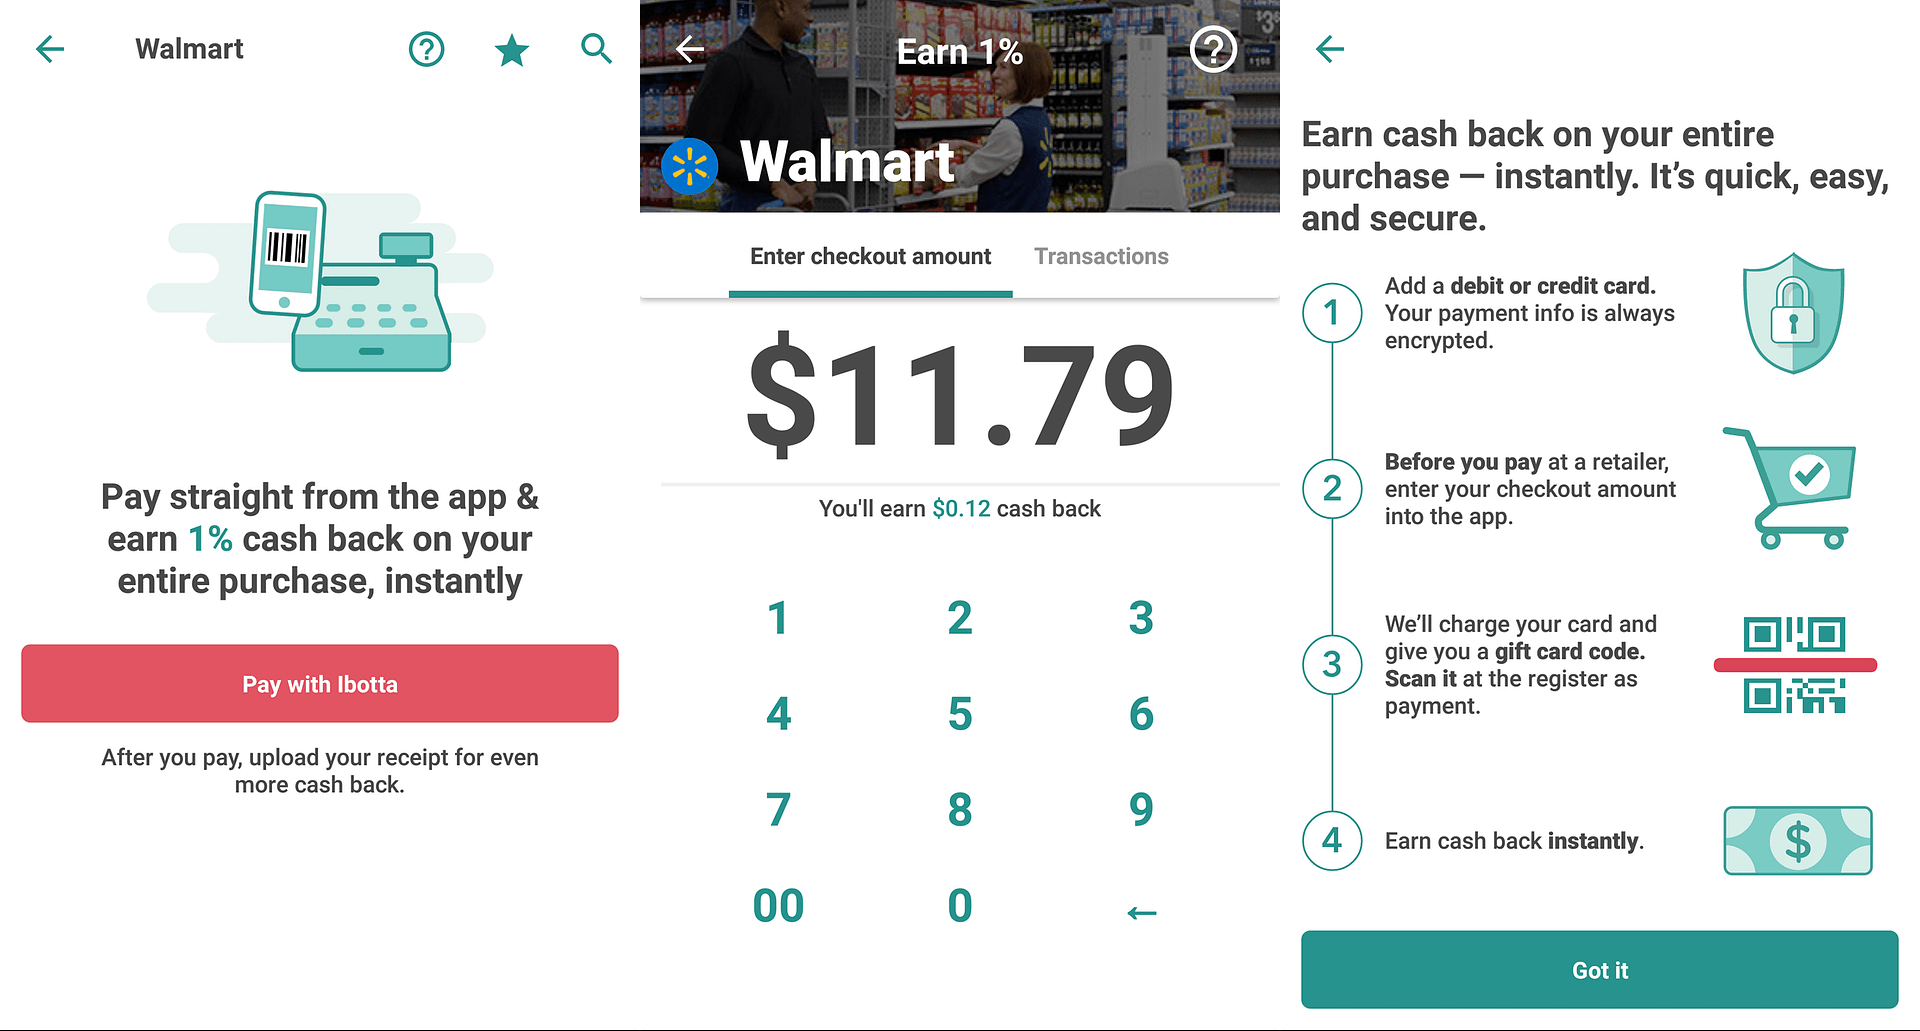 Pay with Ibotta at Walmart